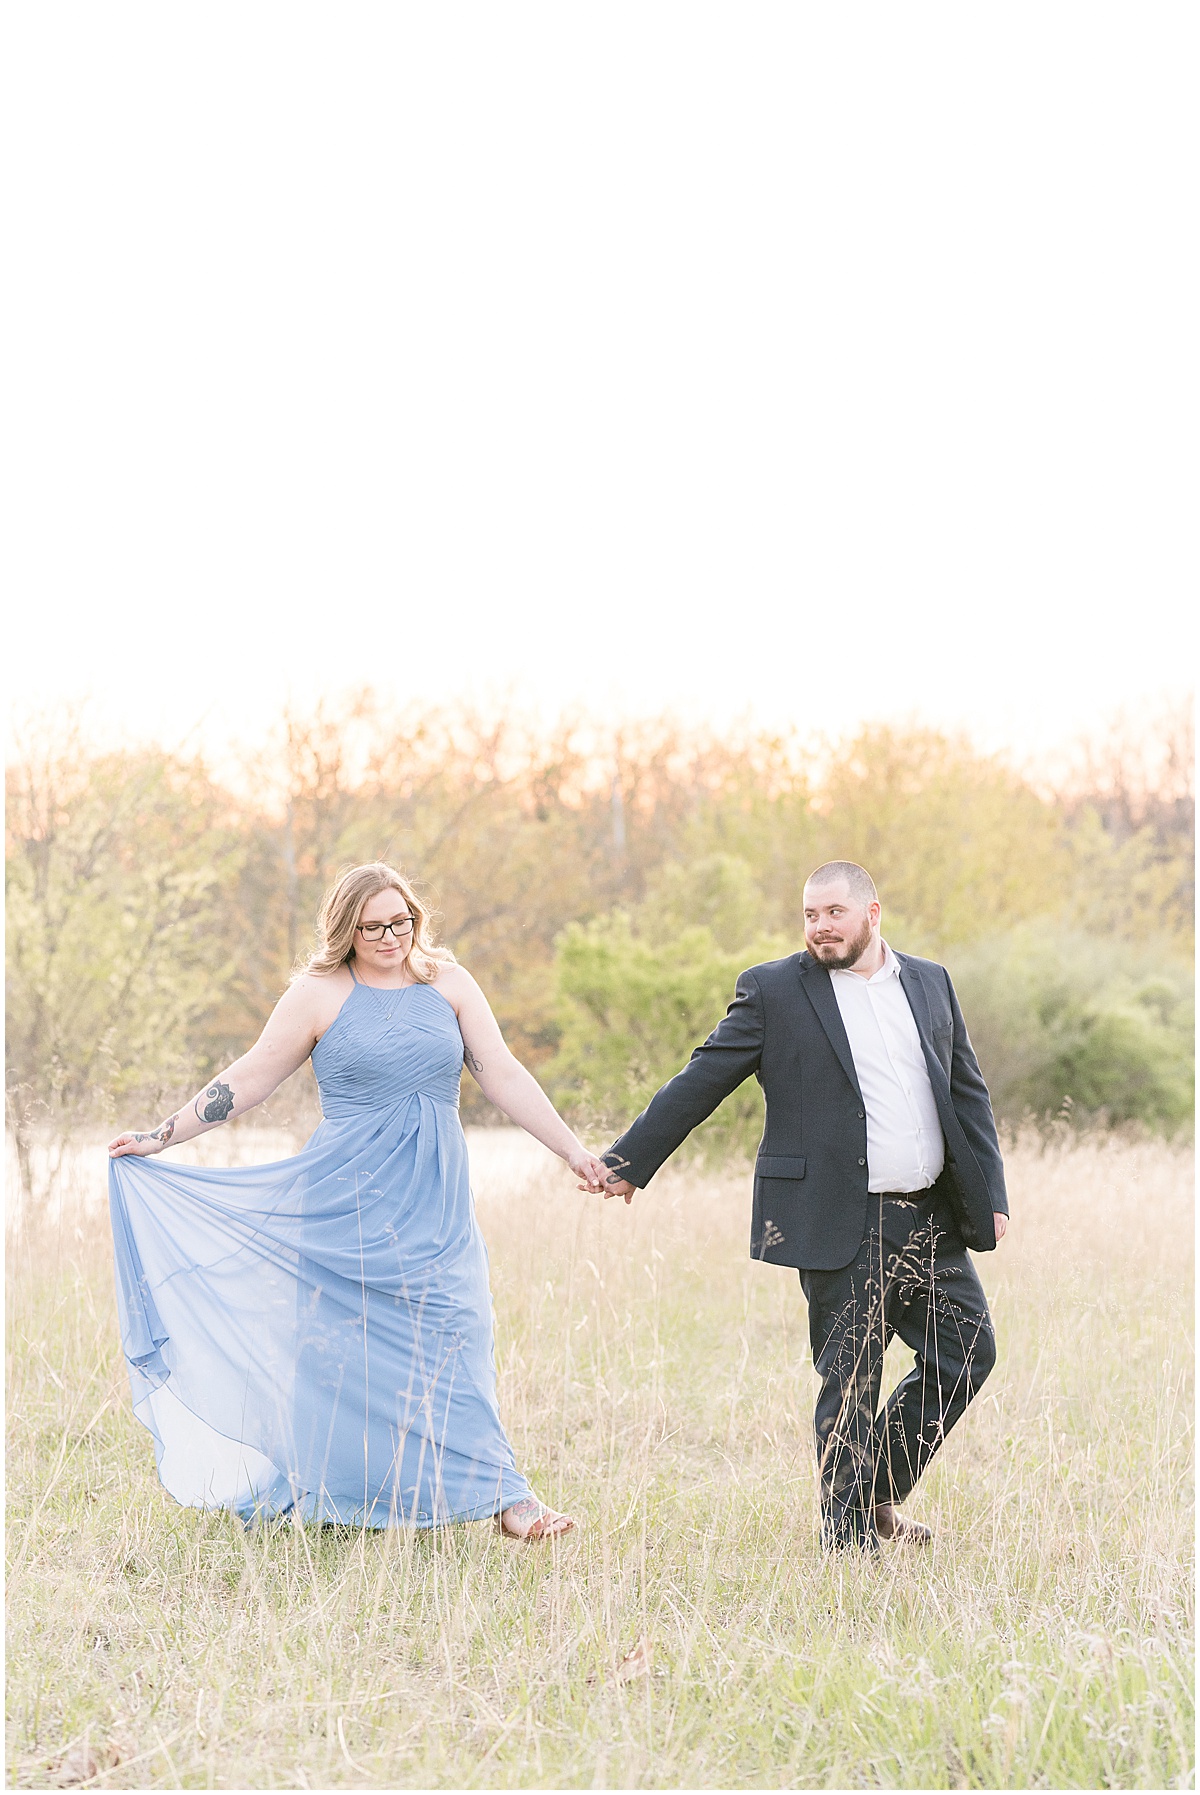 Spring engagement photos at Fairfield Lakes Park in Lafayette, Indiana